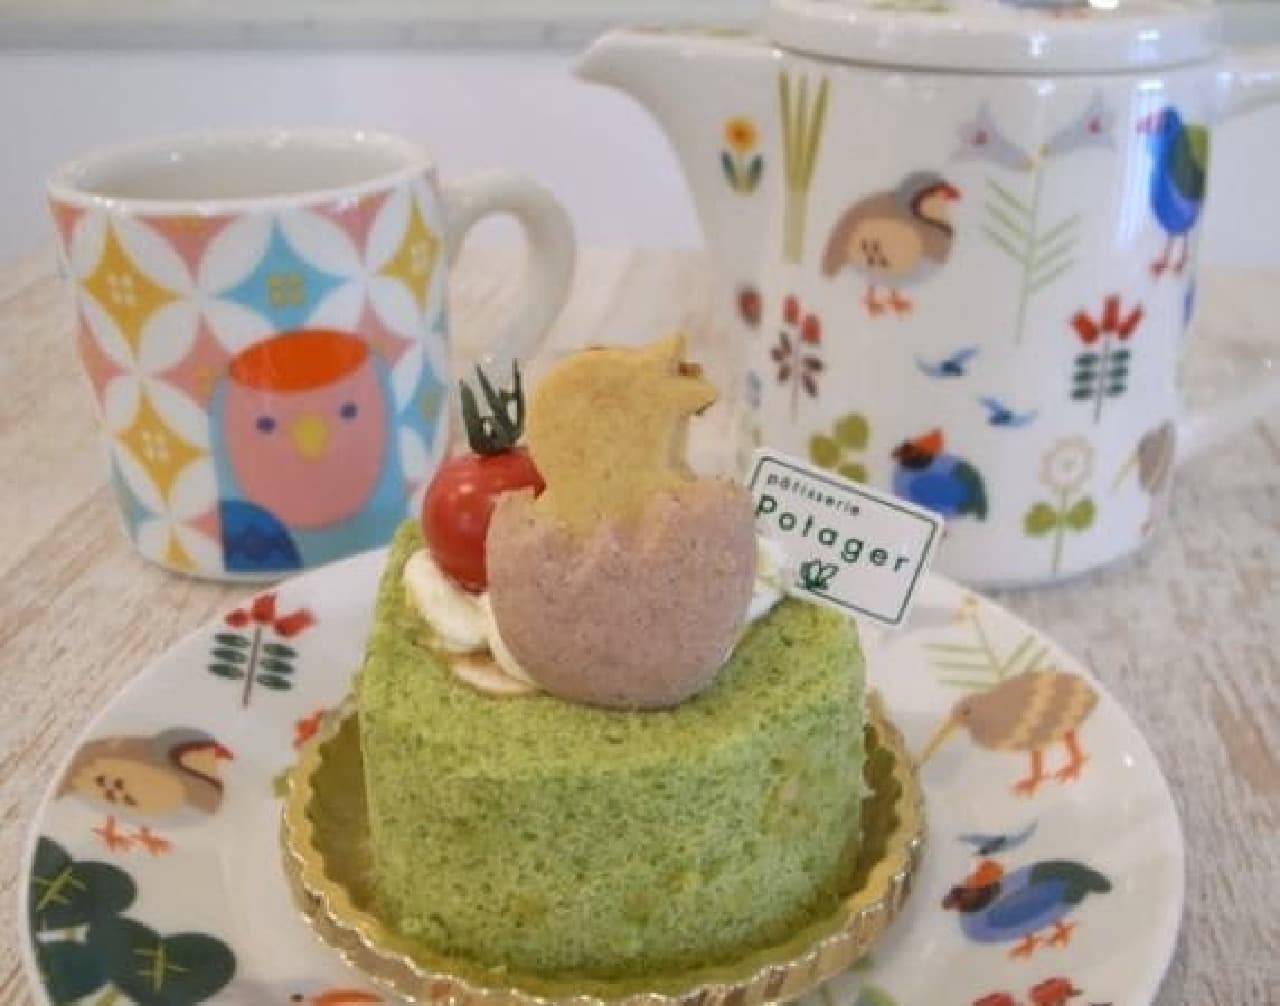 "Vegetable sweets" are now available at Kotori Cafe